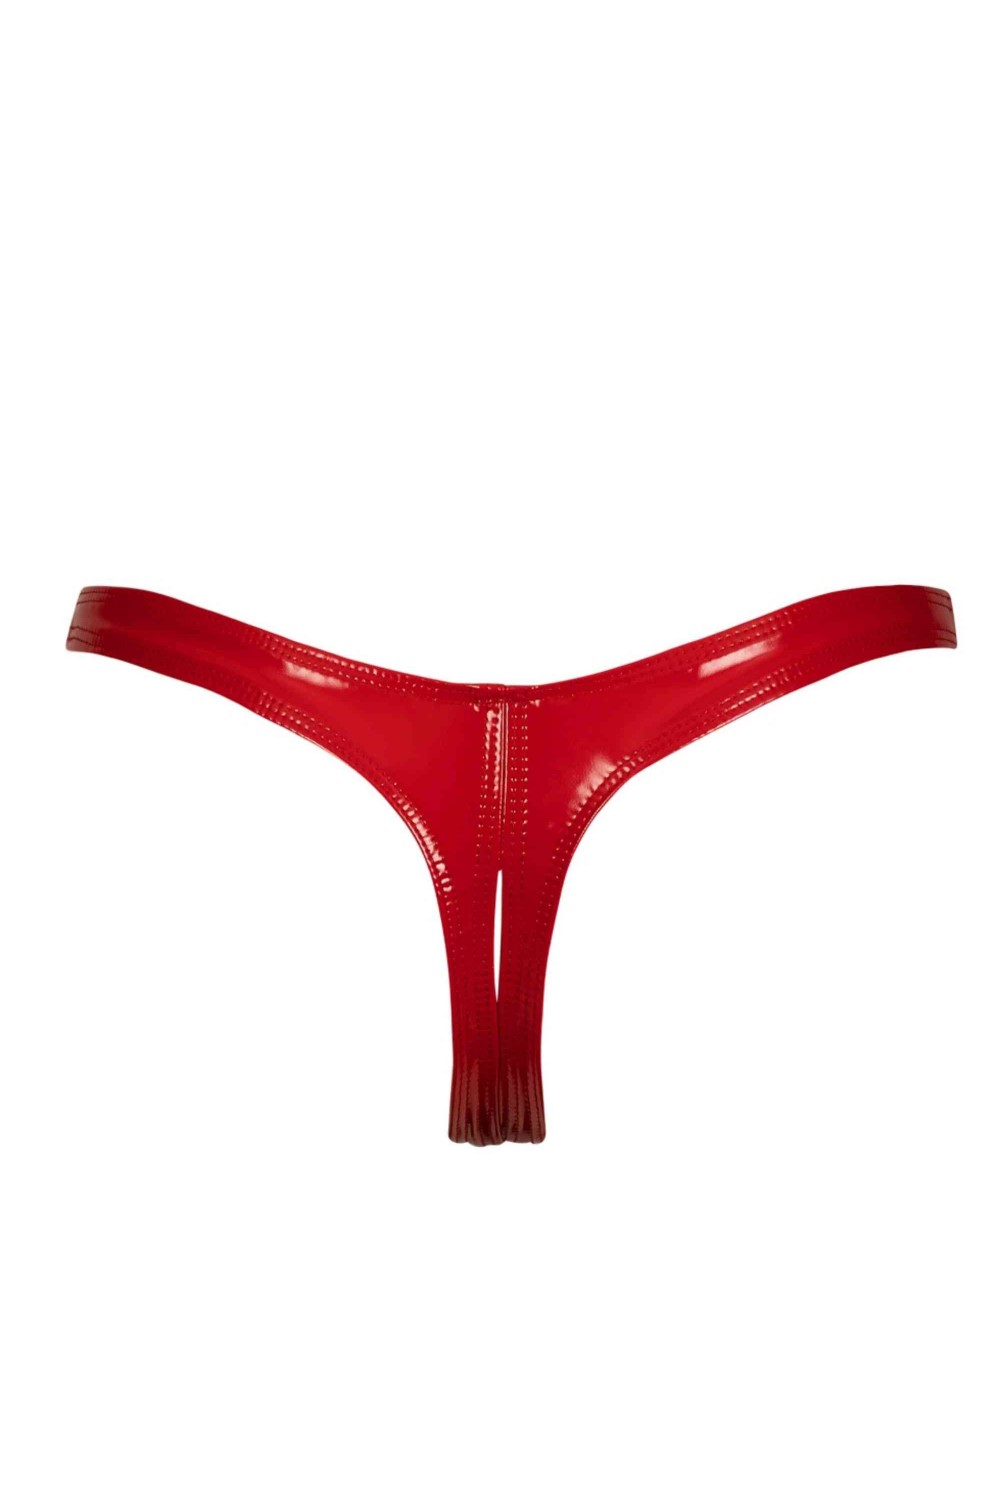 Tanga Crotchless Thong With Keyhole Free Delivery Yxnew7599 Sexy